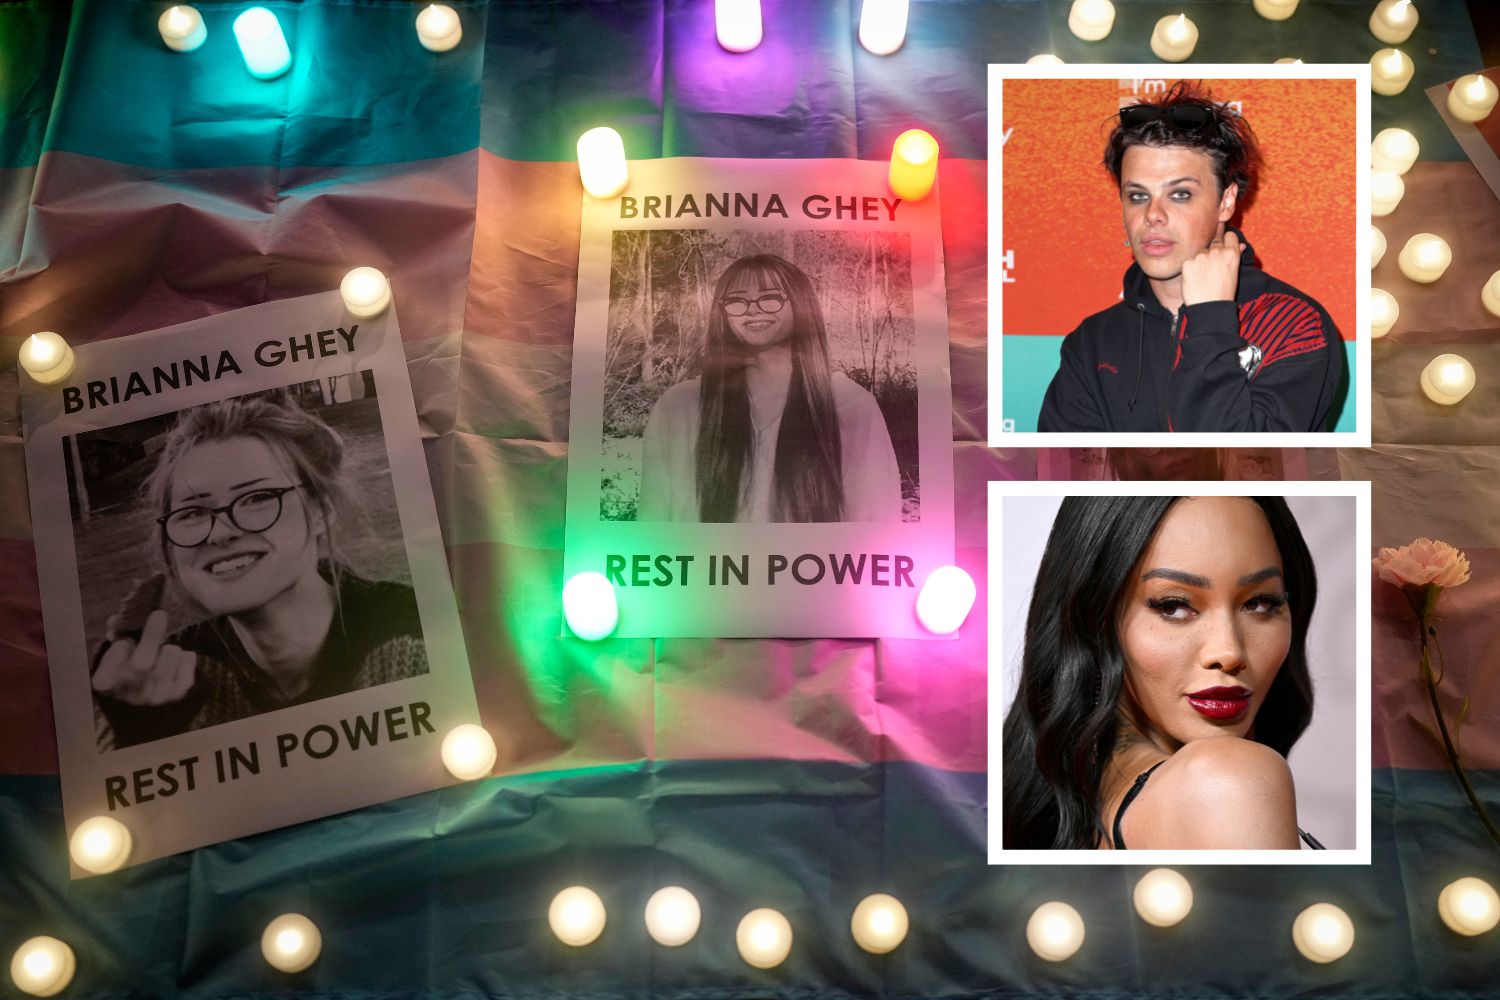 Who Is Brianna Ghey? YUNGBLUD, Munroe Bergdorf Pay Tribute